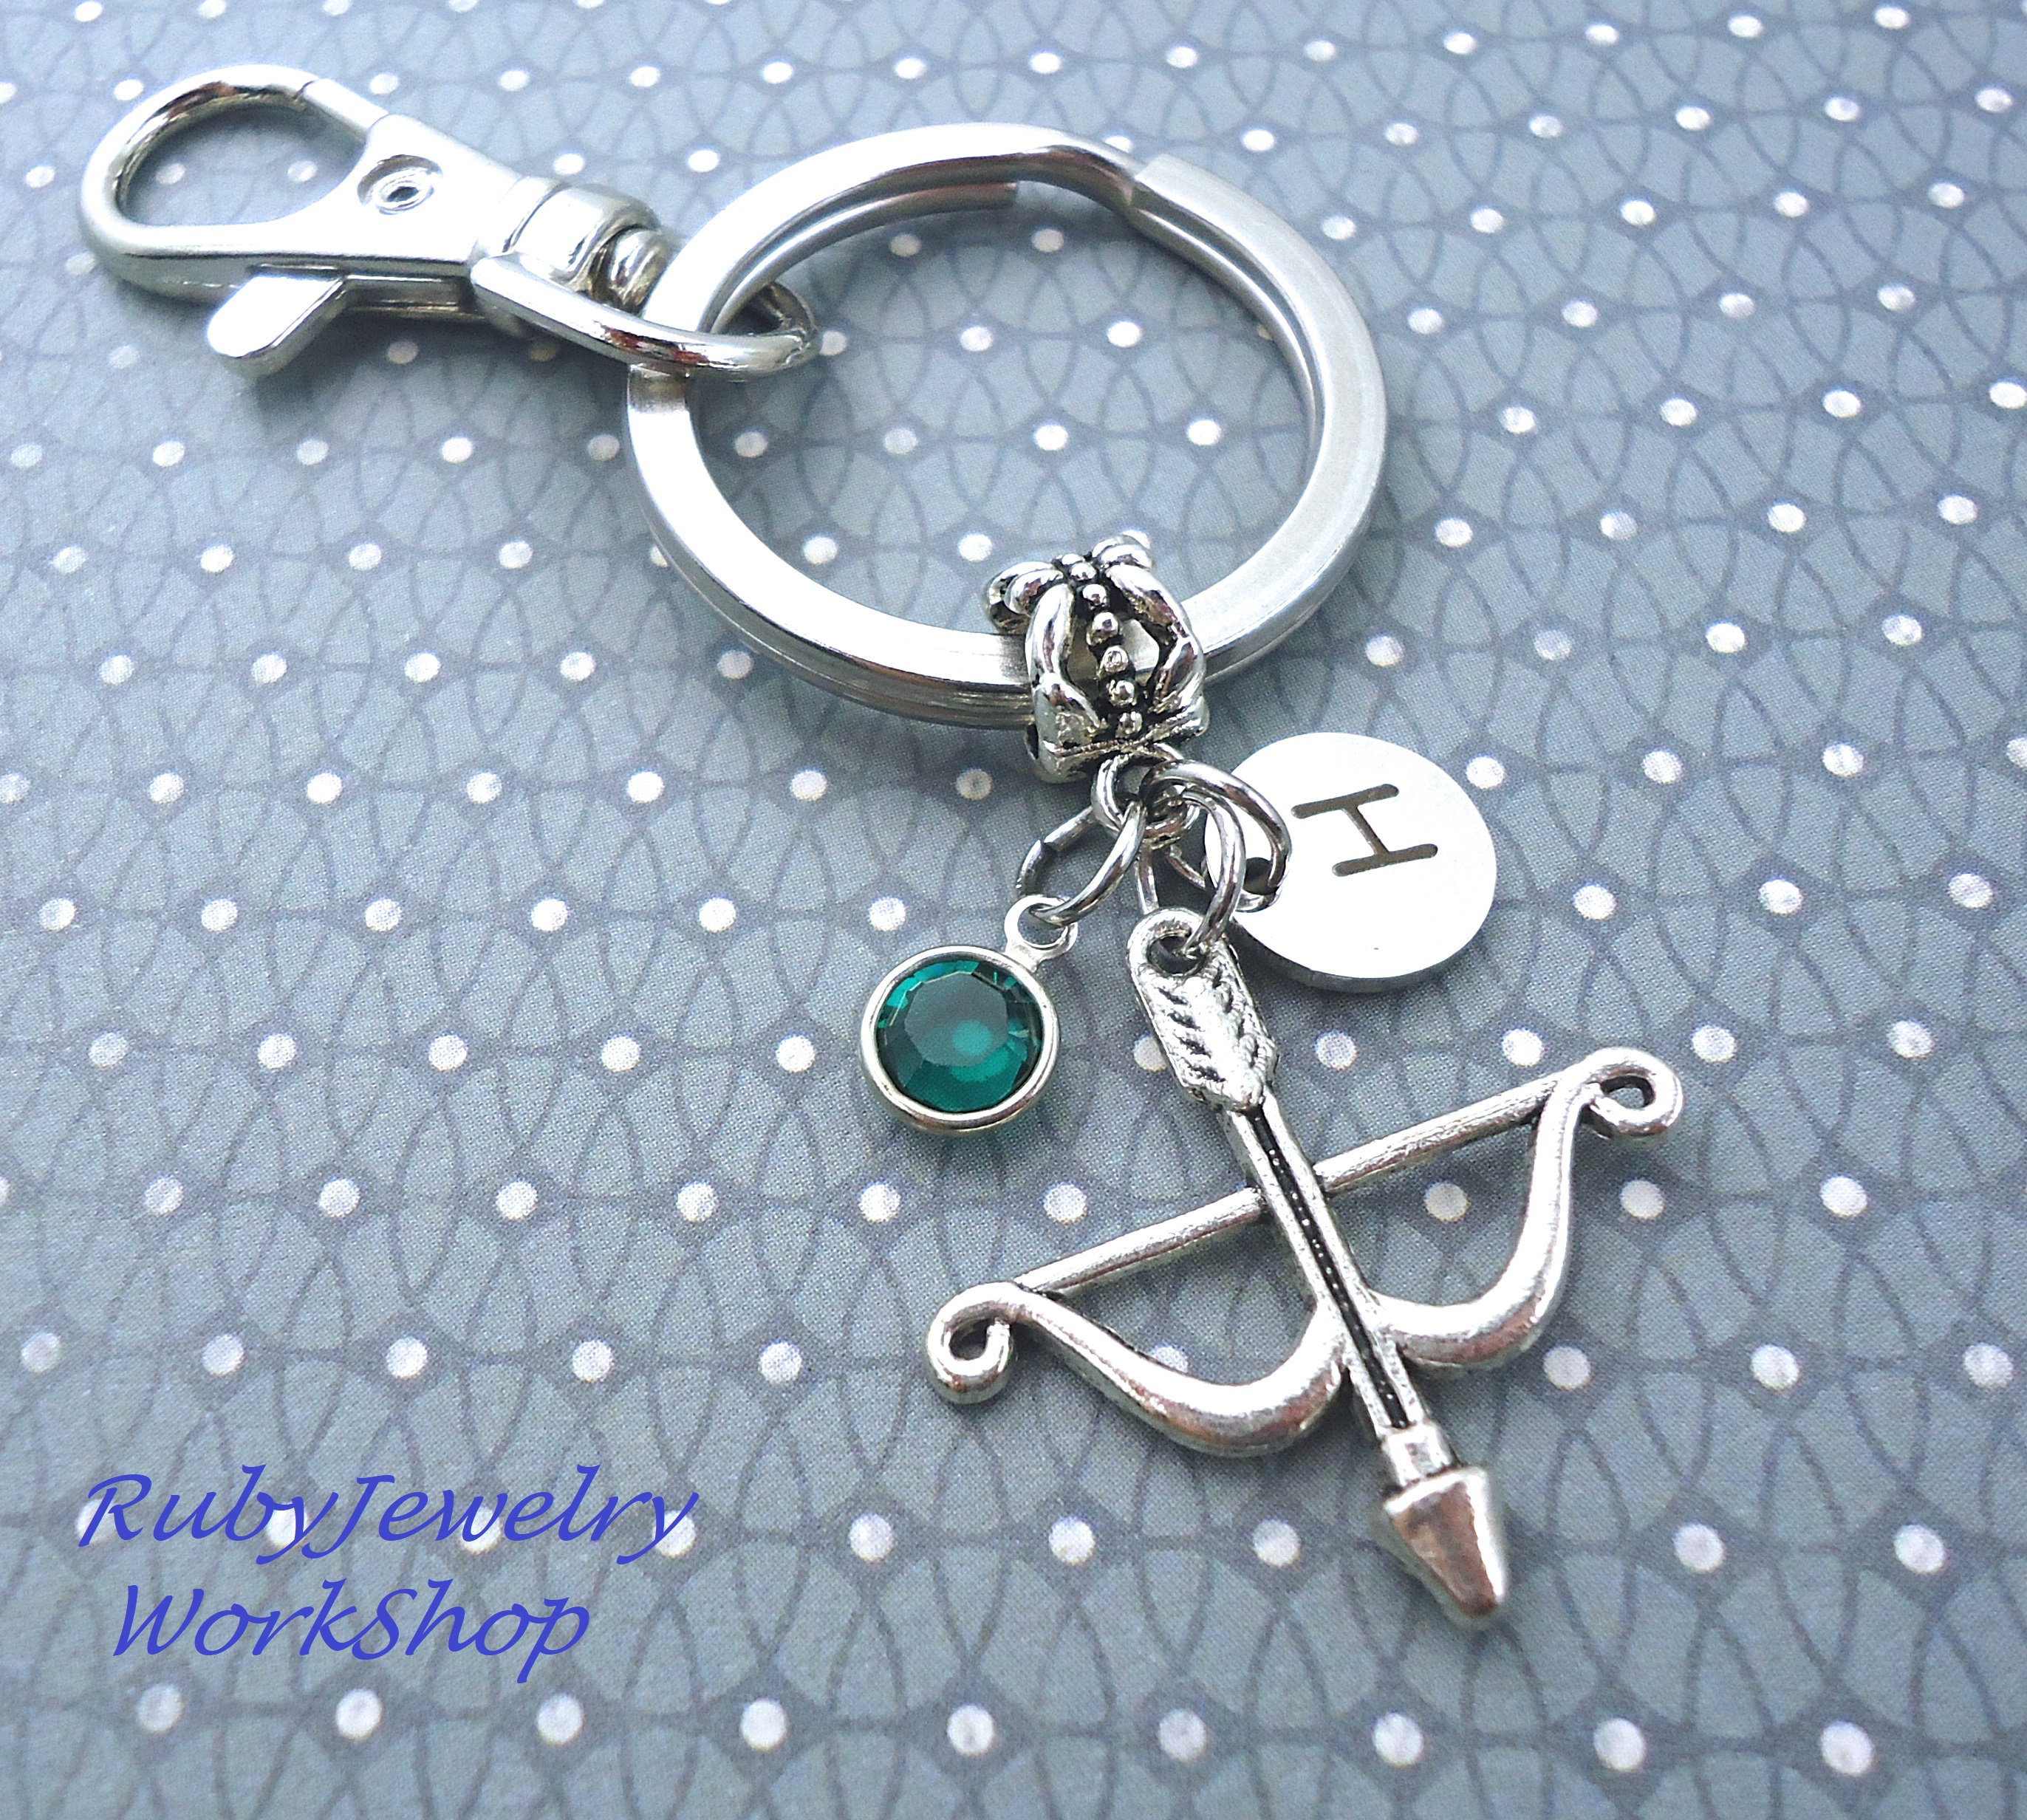 Metal Antique Silver Color Keychains Keyrings FE5H7 Bow Arrow Key Chain Ring